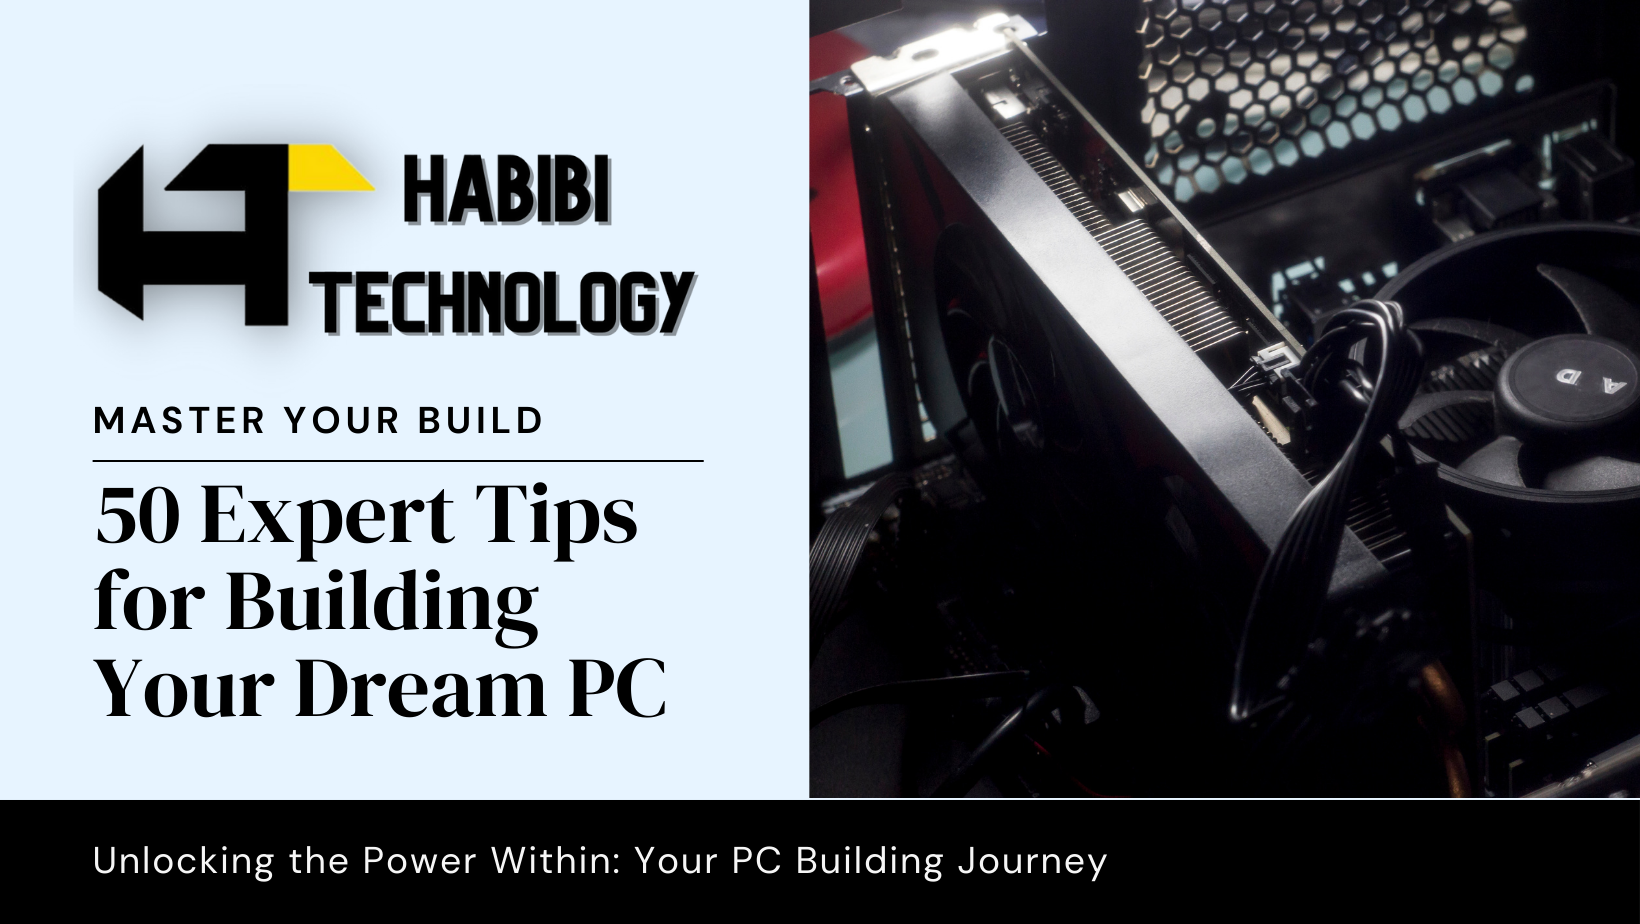 The Ultimate Guide to Building Your Own PC: 50 Expert Tips